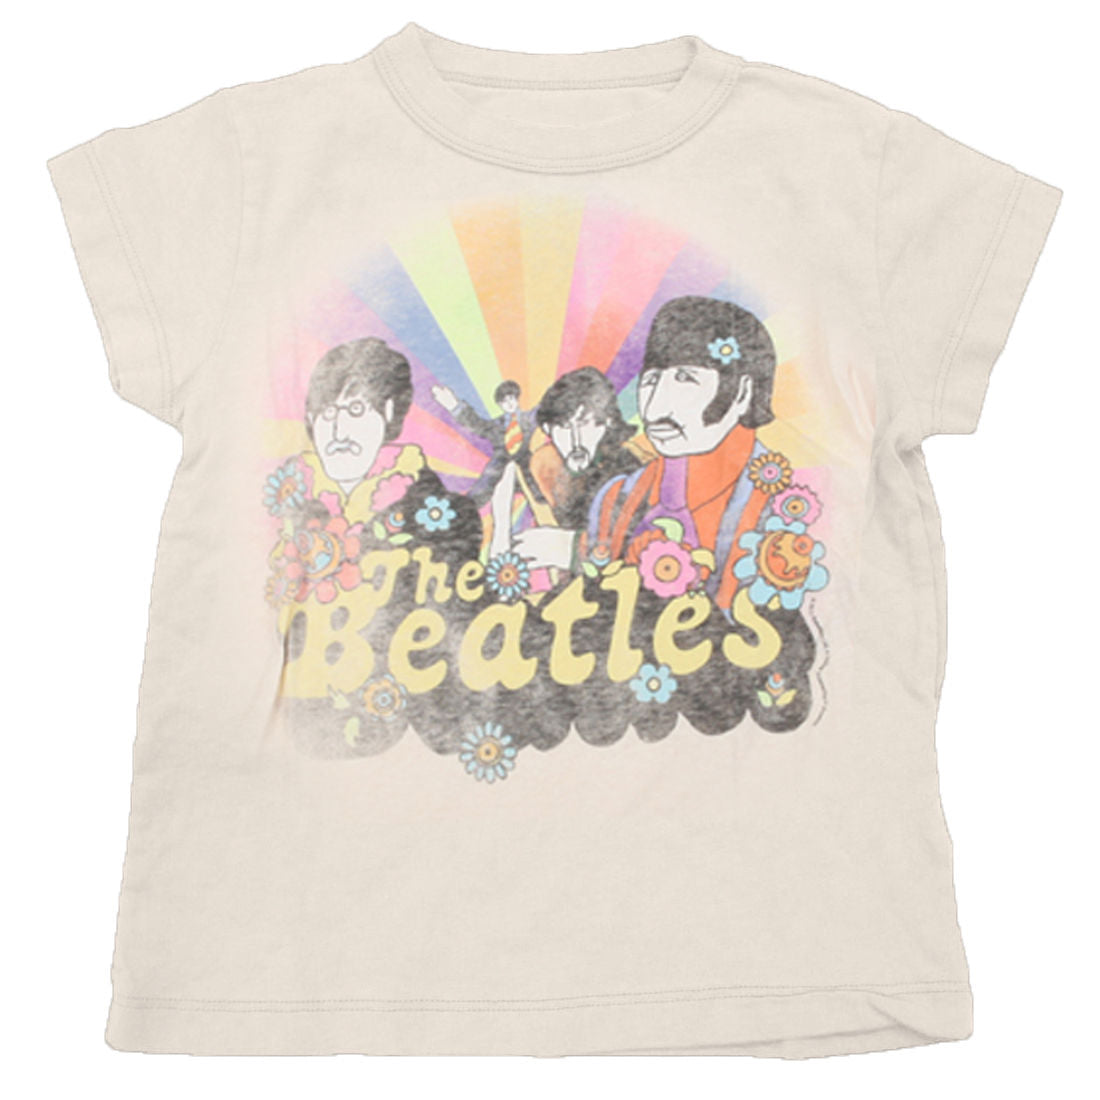 The Beatles - Retro Faded Flowers Youth T-Shirt